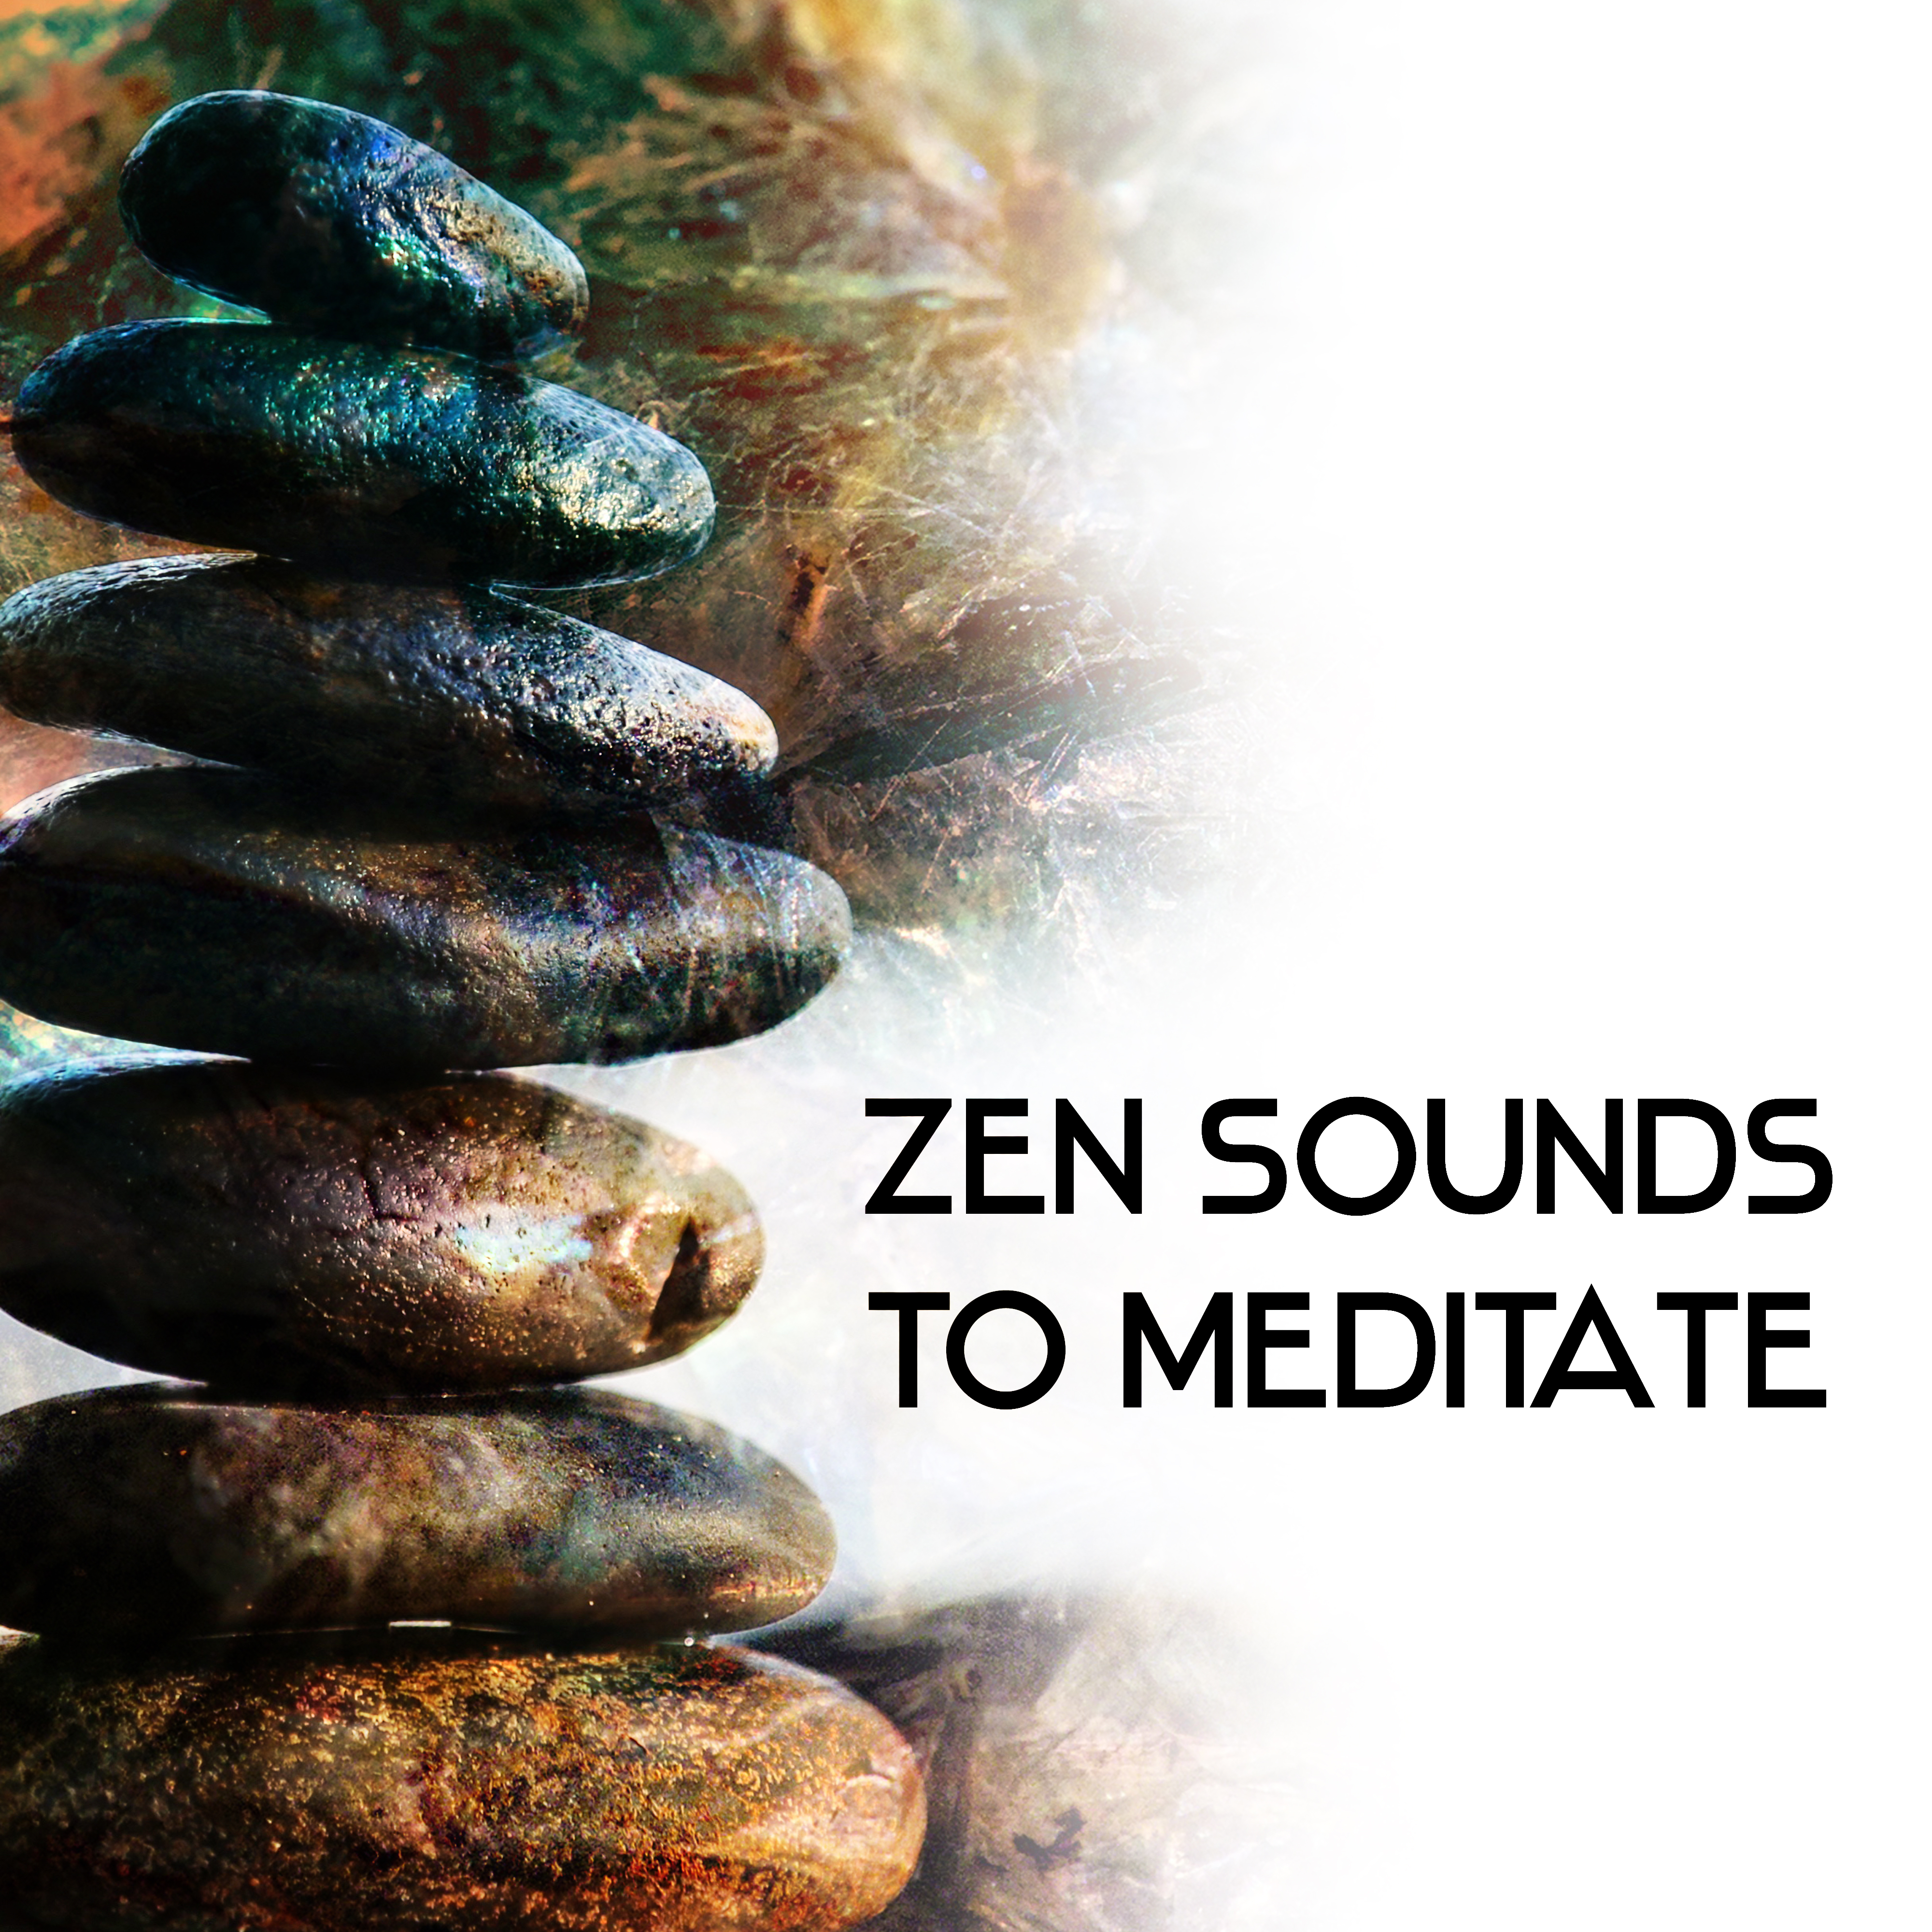 Zen Sounds to Meditate – Calming Sounds to Rest & Relax, New Age Music to Meditate, Inner Peace